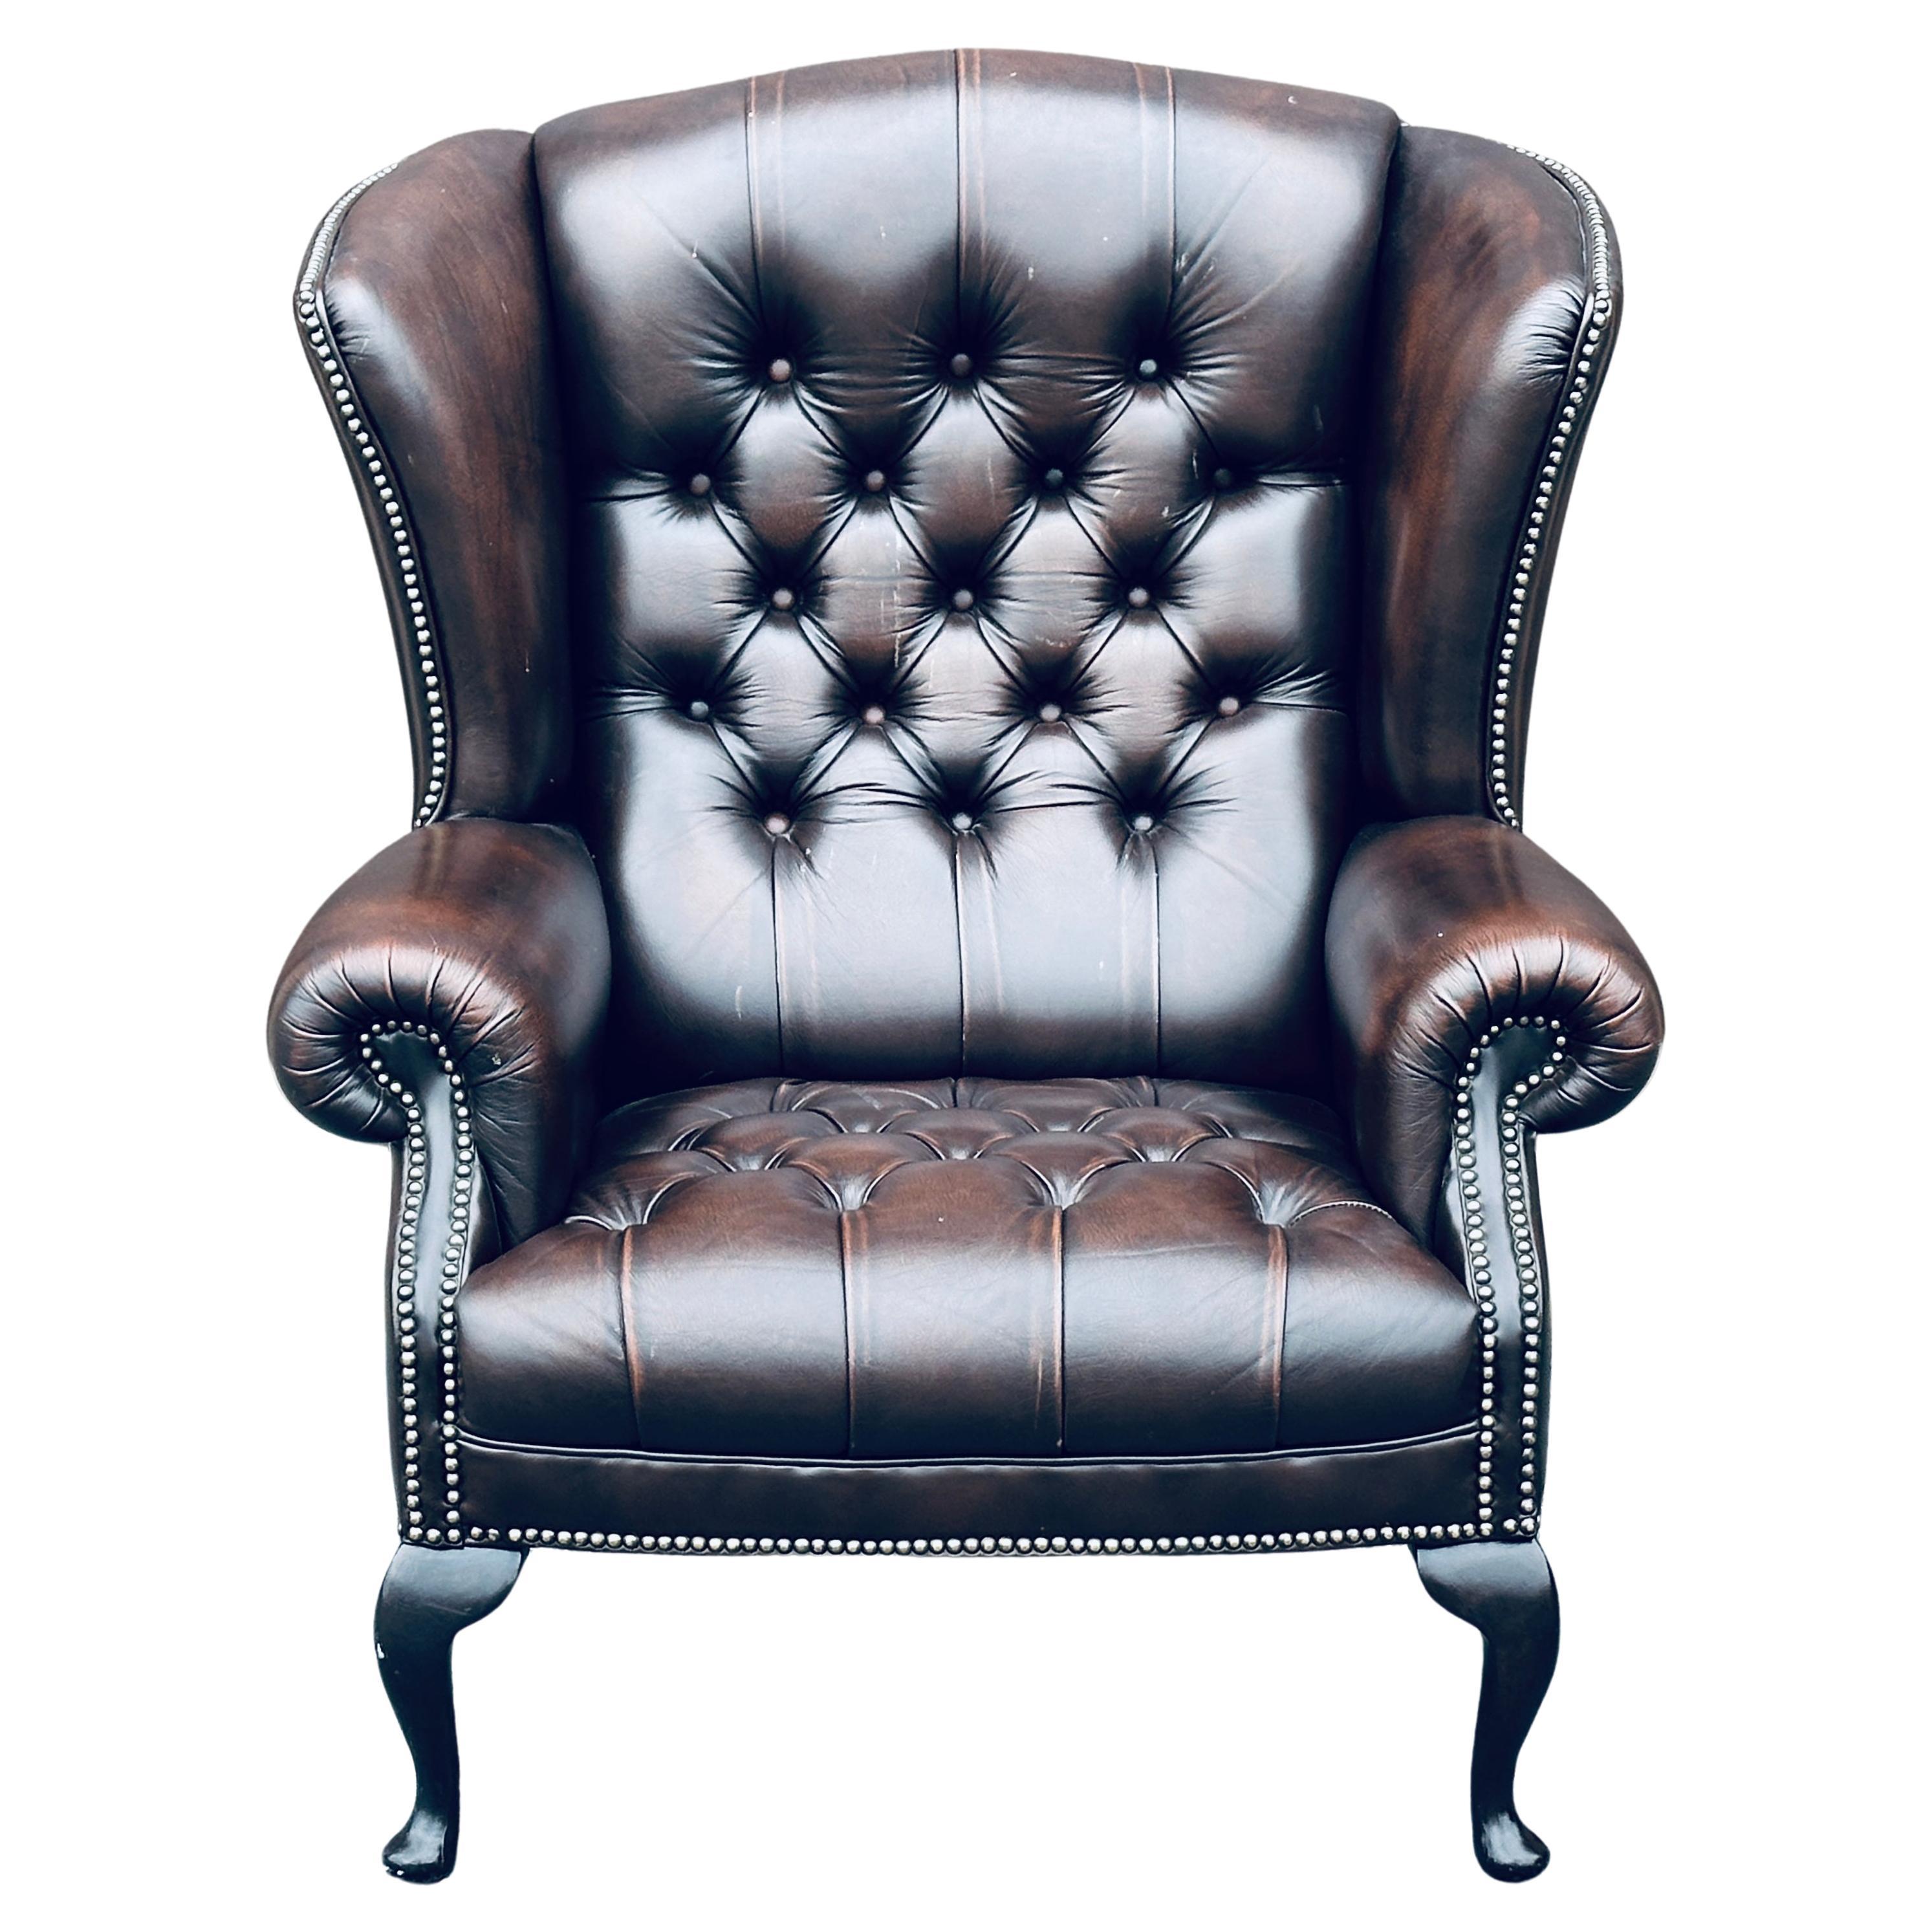 Tufted English Leather Wing Chair Chesterfield Wingback by Pendragon For Sale